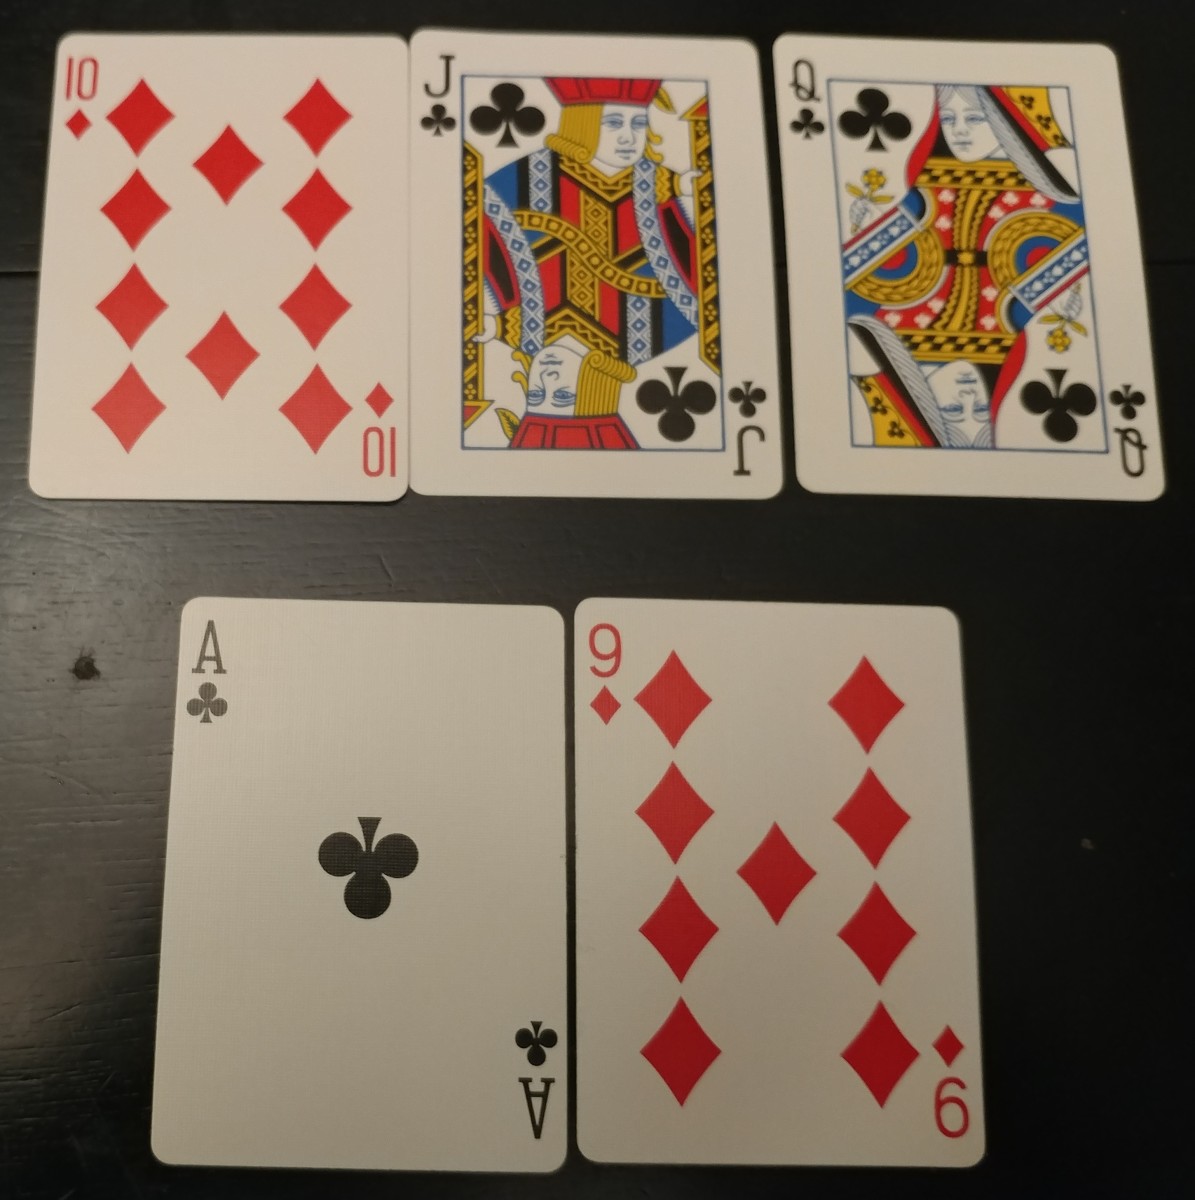 This hand has one over card and a straight draw. This could be a good semi-bluff.